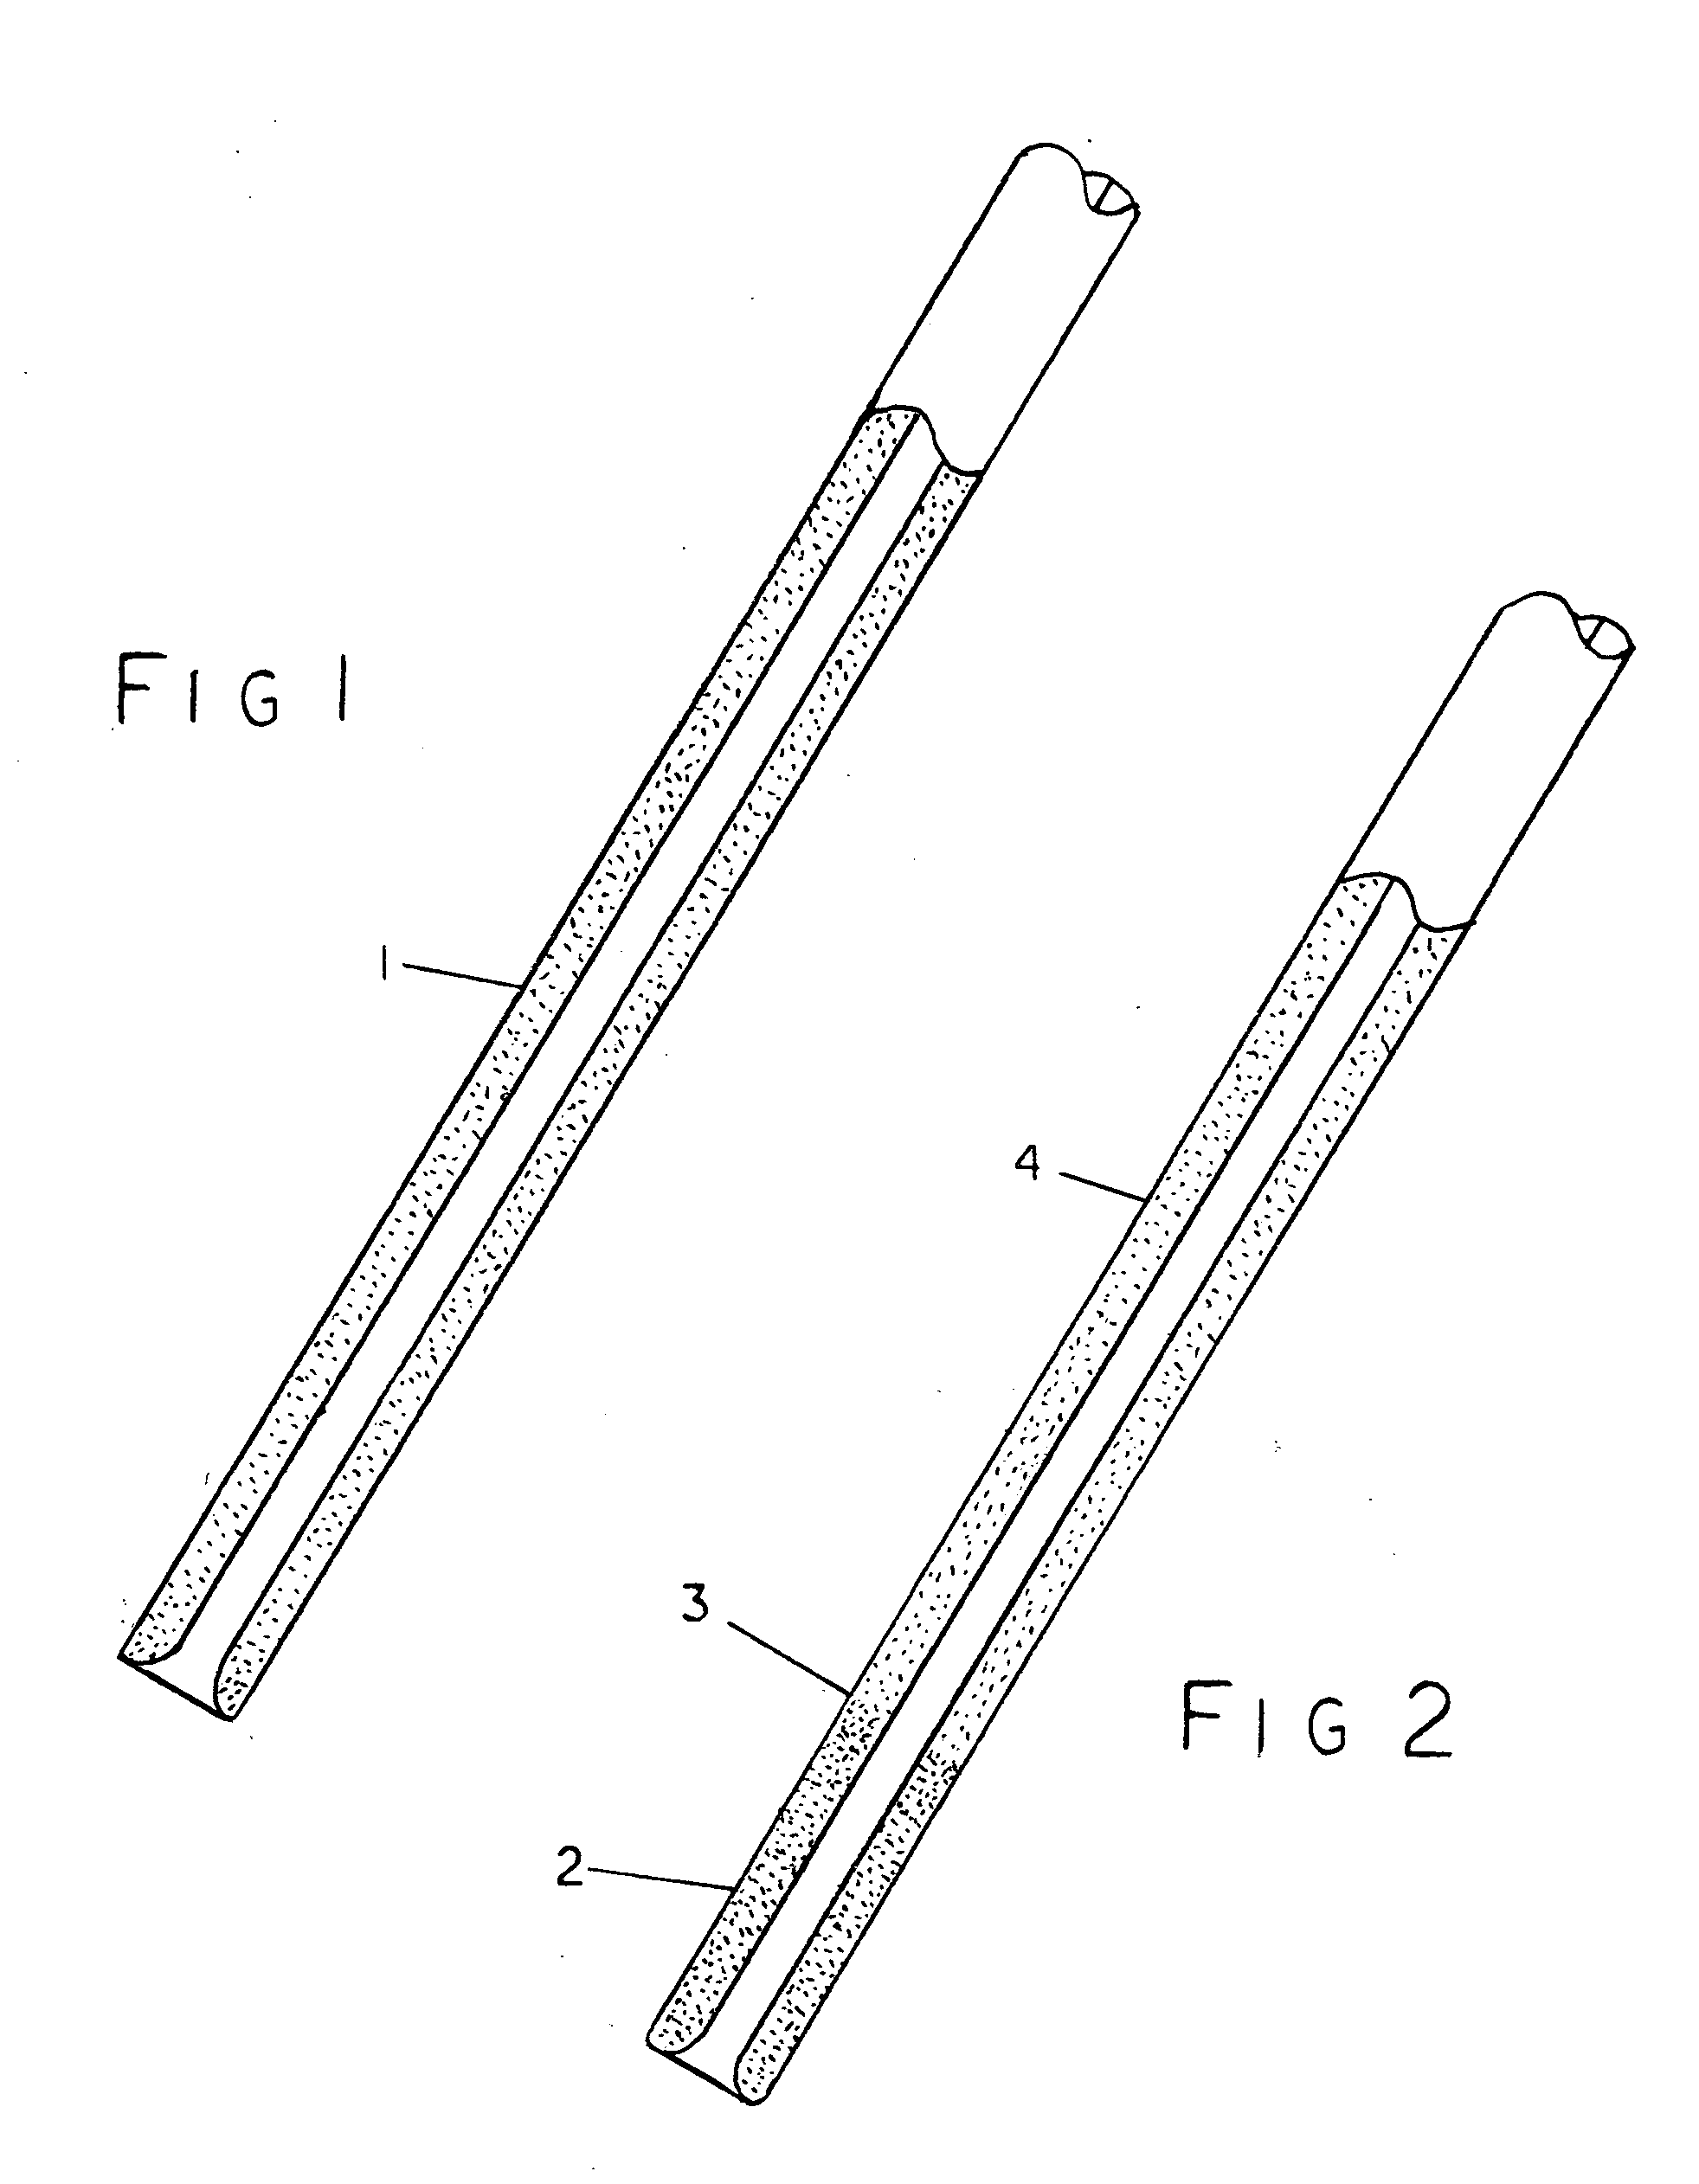 Vibrating, magnetically guidable catheter with magnetic powder commingled with resin, extruded as an integral part the catheter